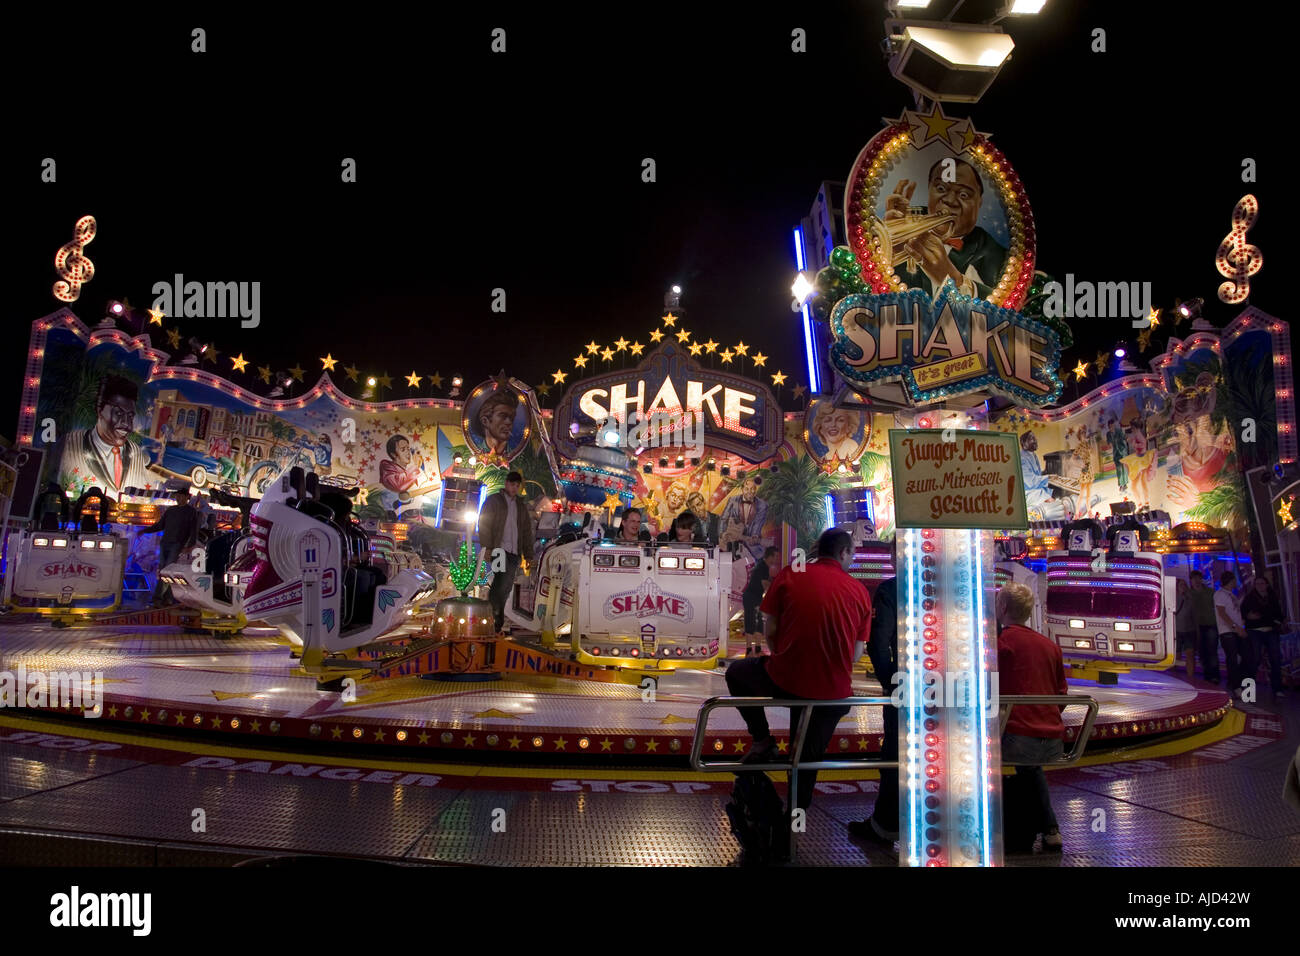 carousel Shake on the Cranger fair at night, Germany, Ruhr Area, Herne Stock Photo